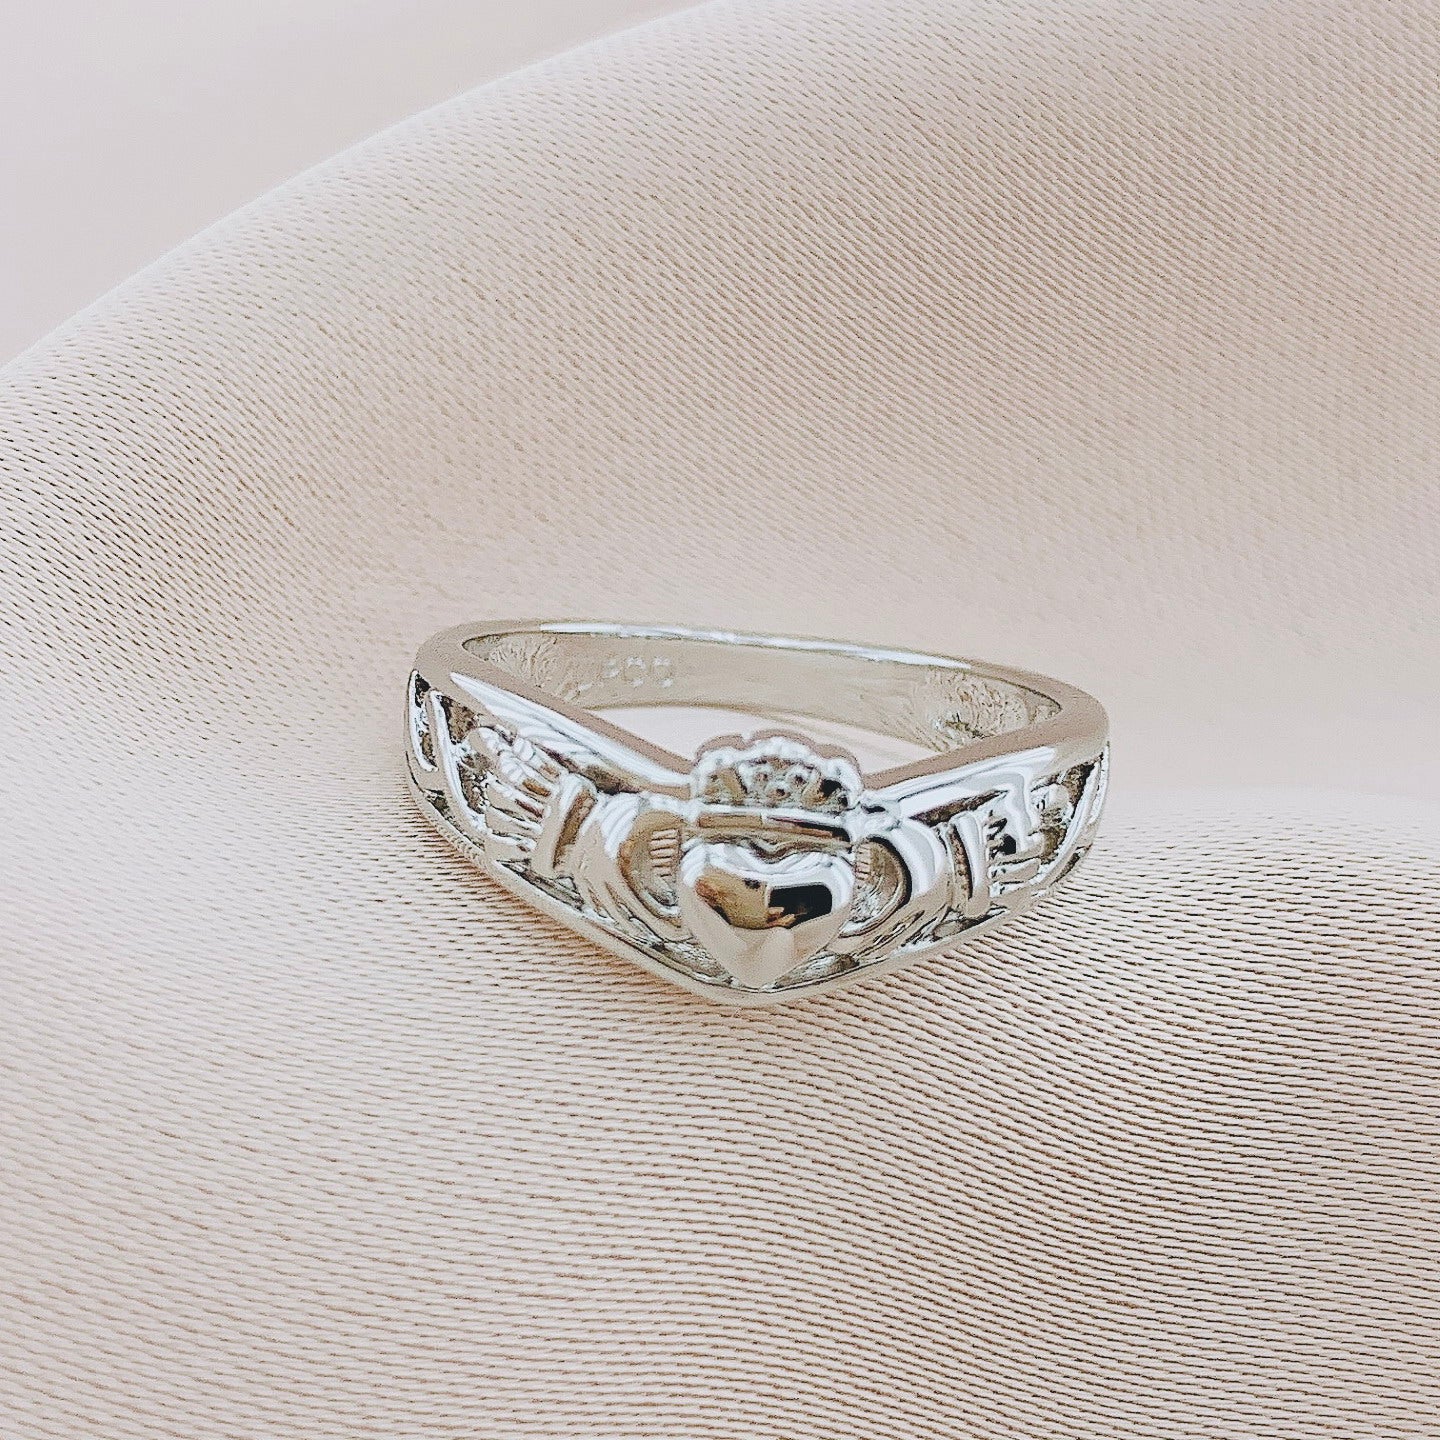 925 Silver Celtic Claddagh Ring